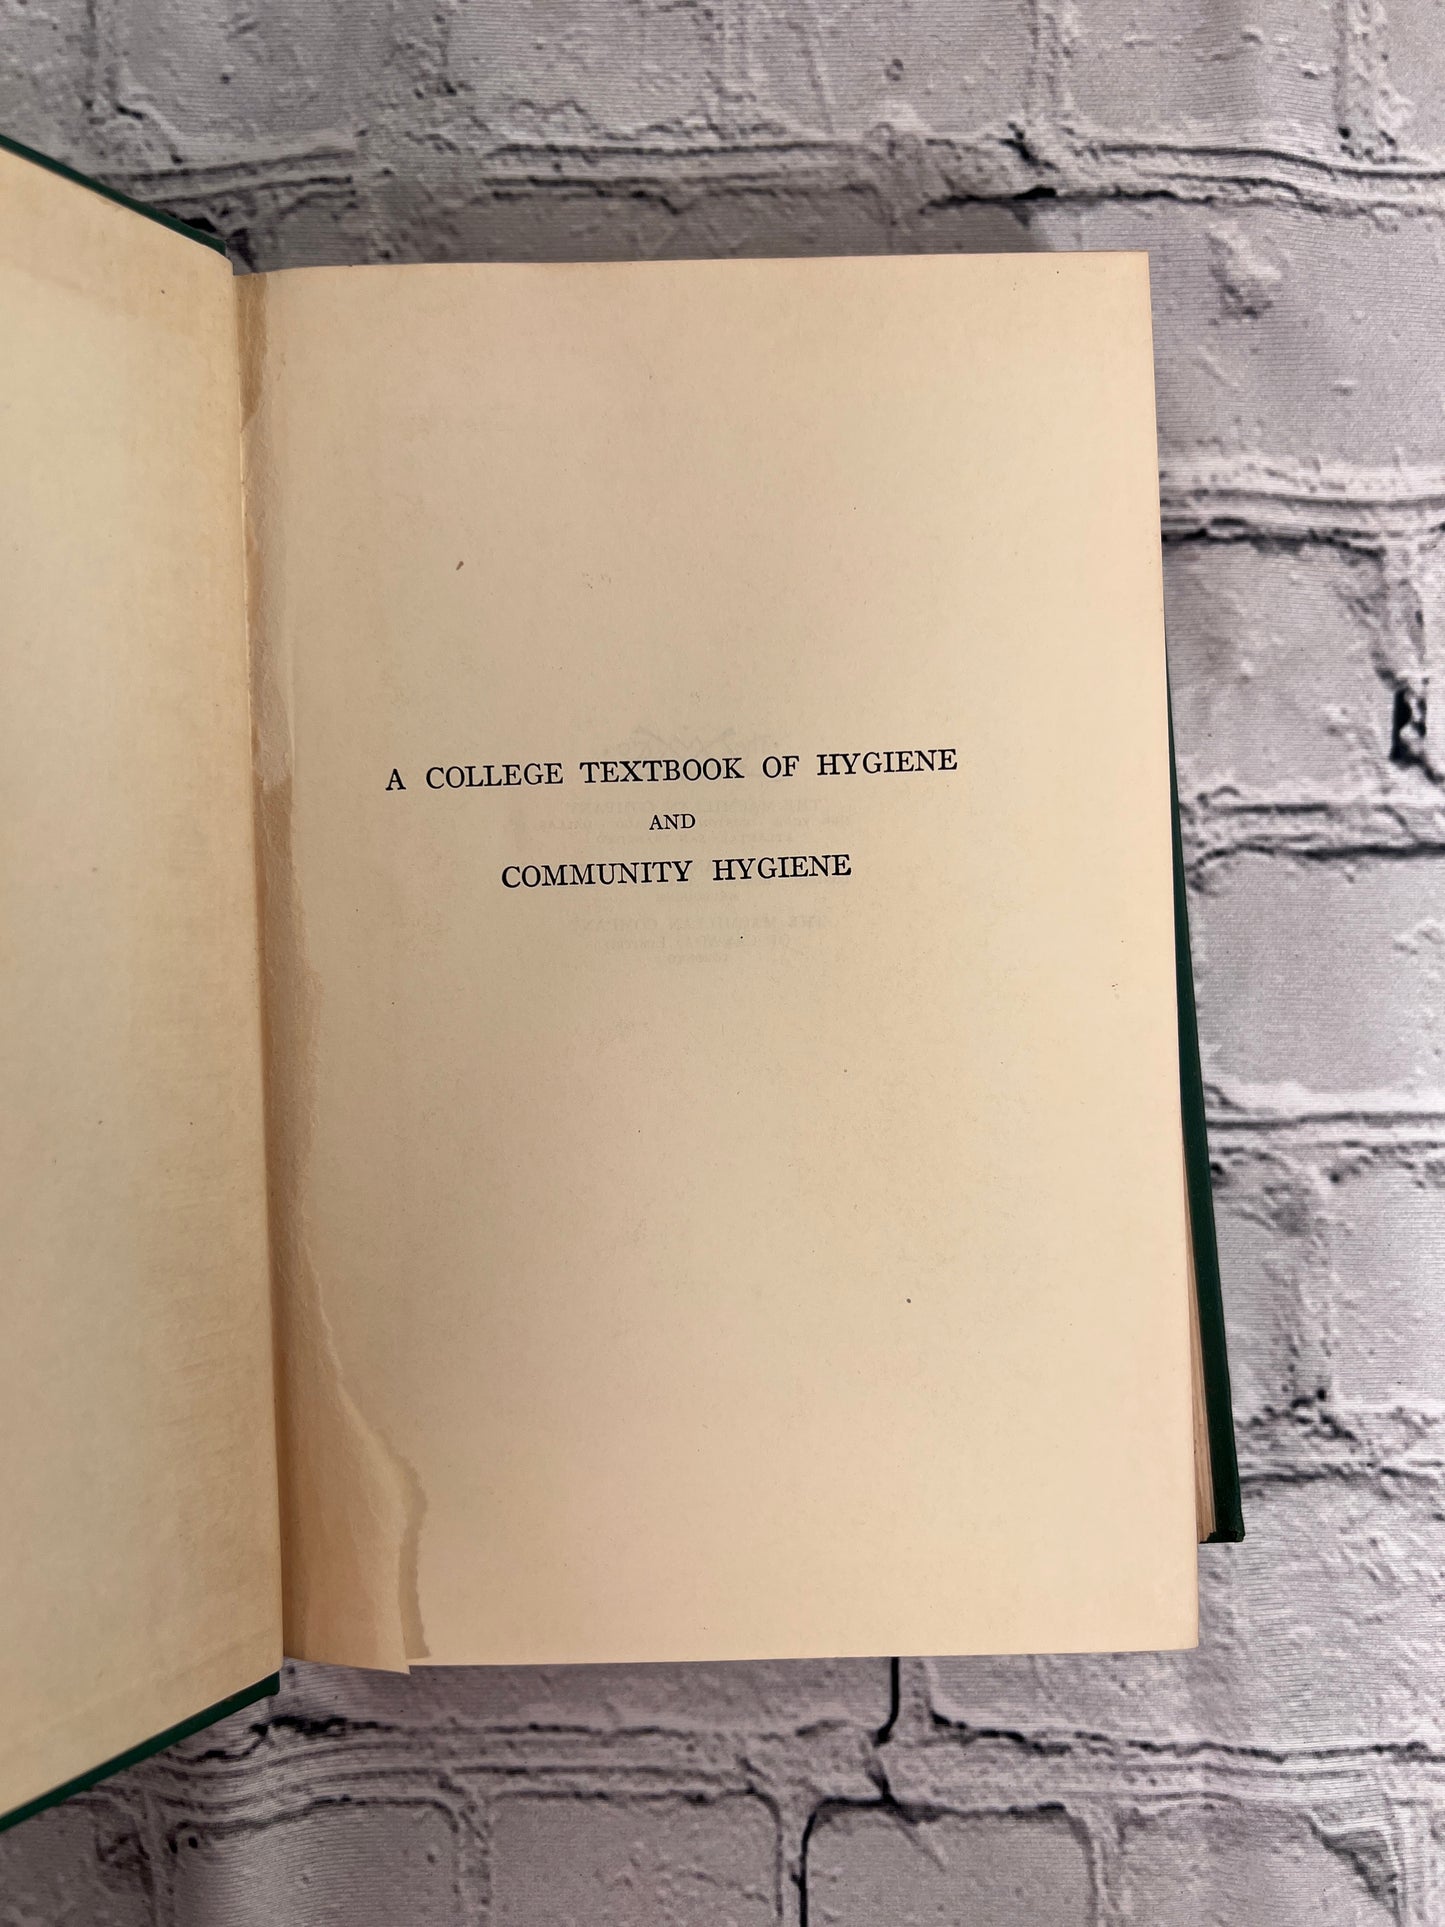 College Textbook of Hygiene and Community Hygiene by Smiley and Gould [1939]